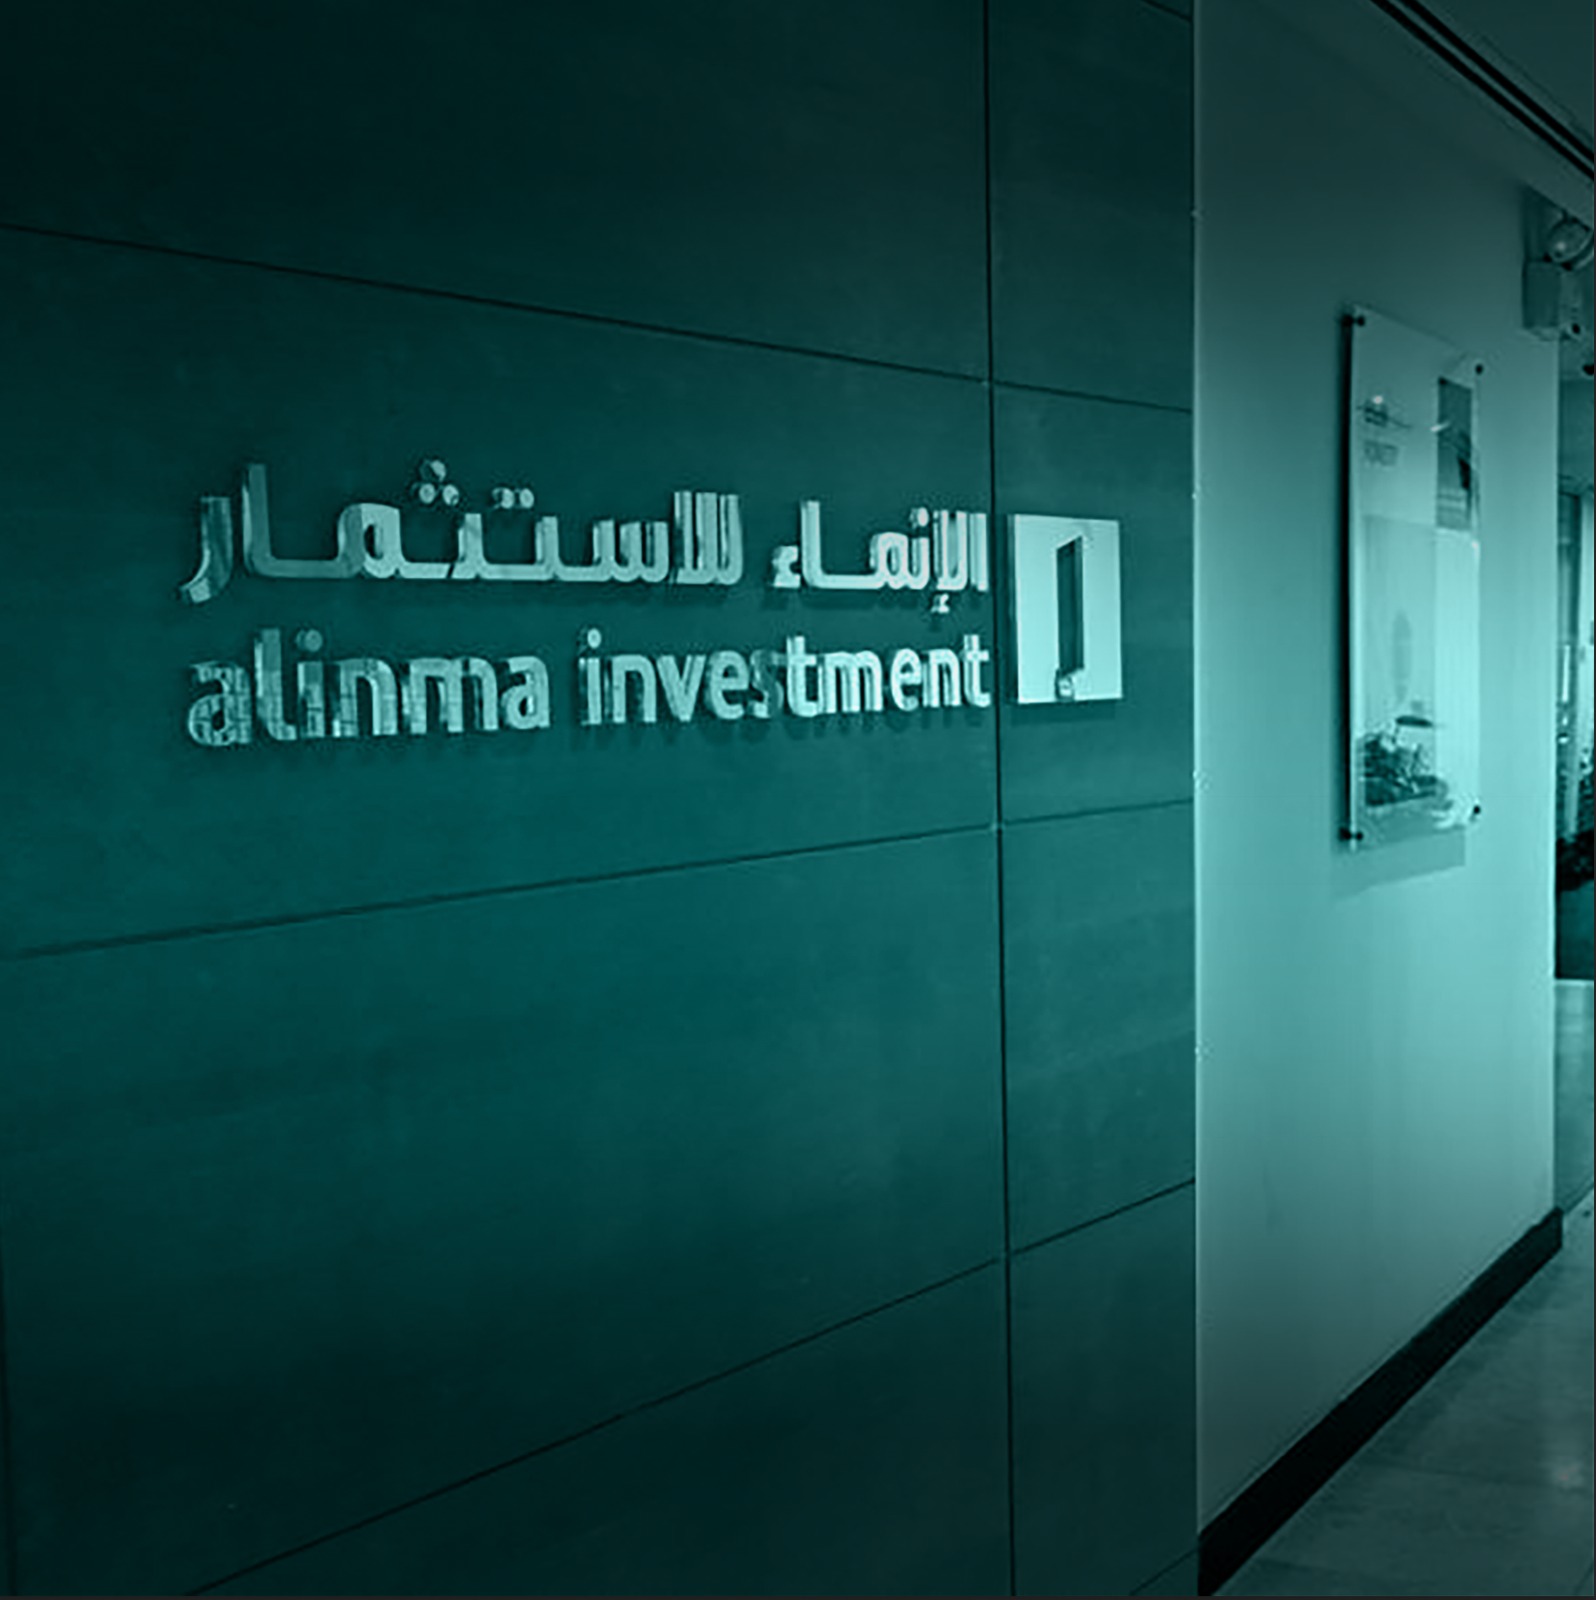 Alinma Investment Company Announces the Results of the Offering Process for the Initial Public Offering of Riyadh Steel on the Parallel Market “Nomu”.